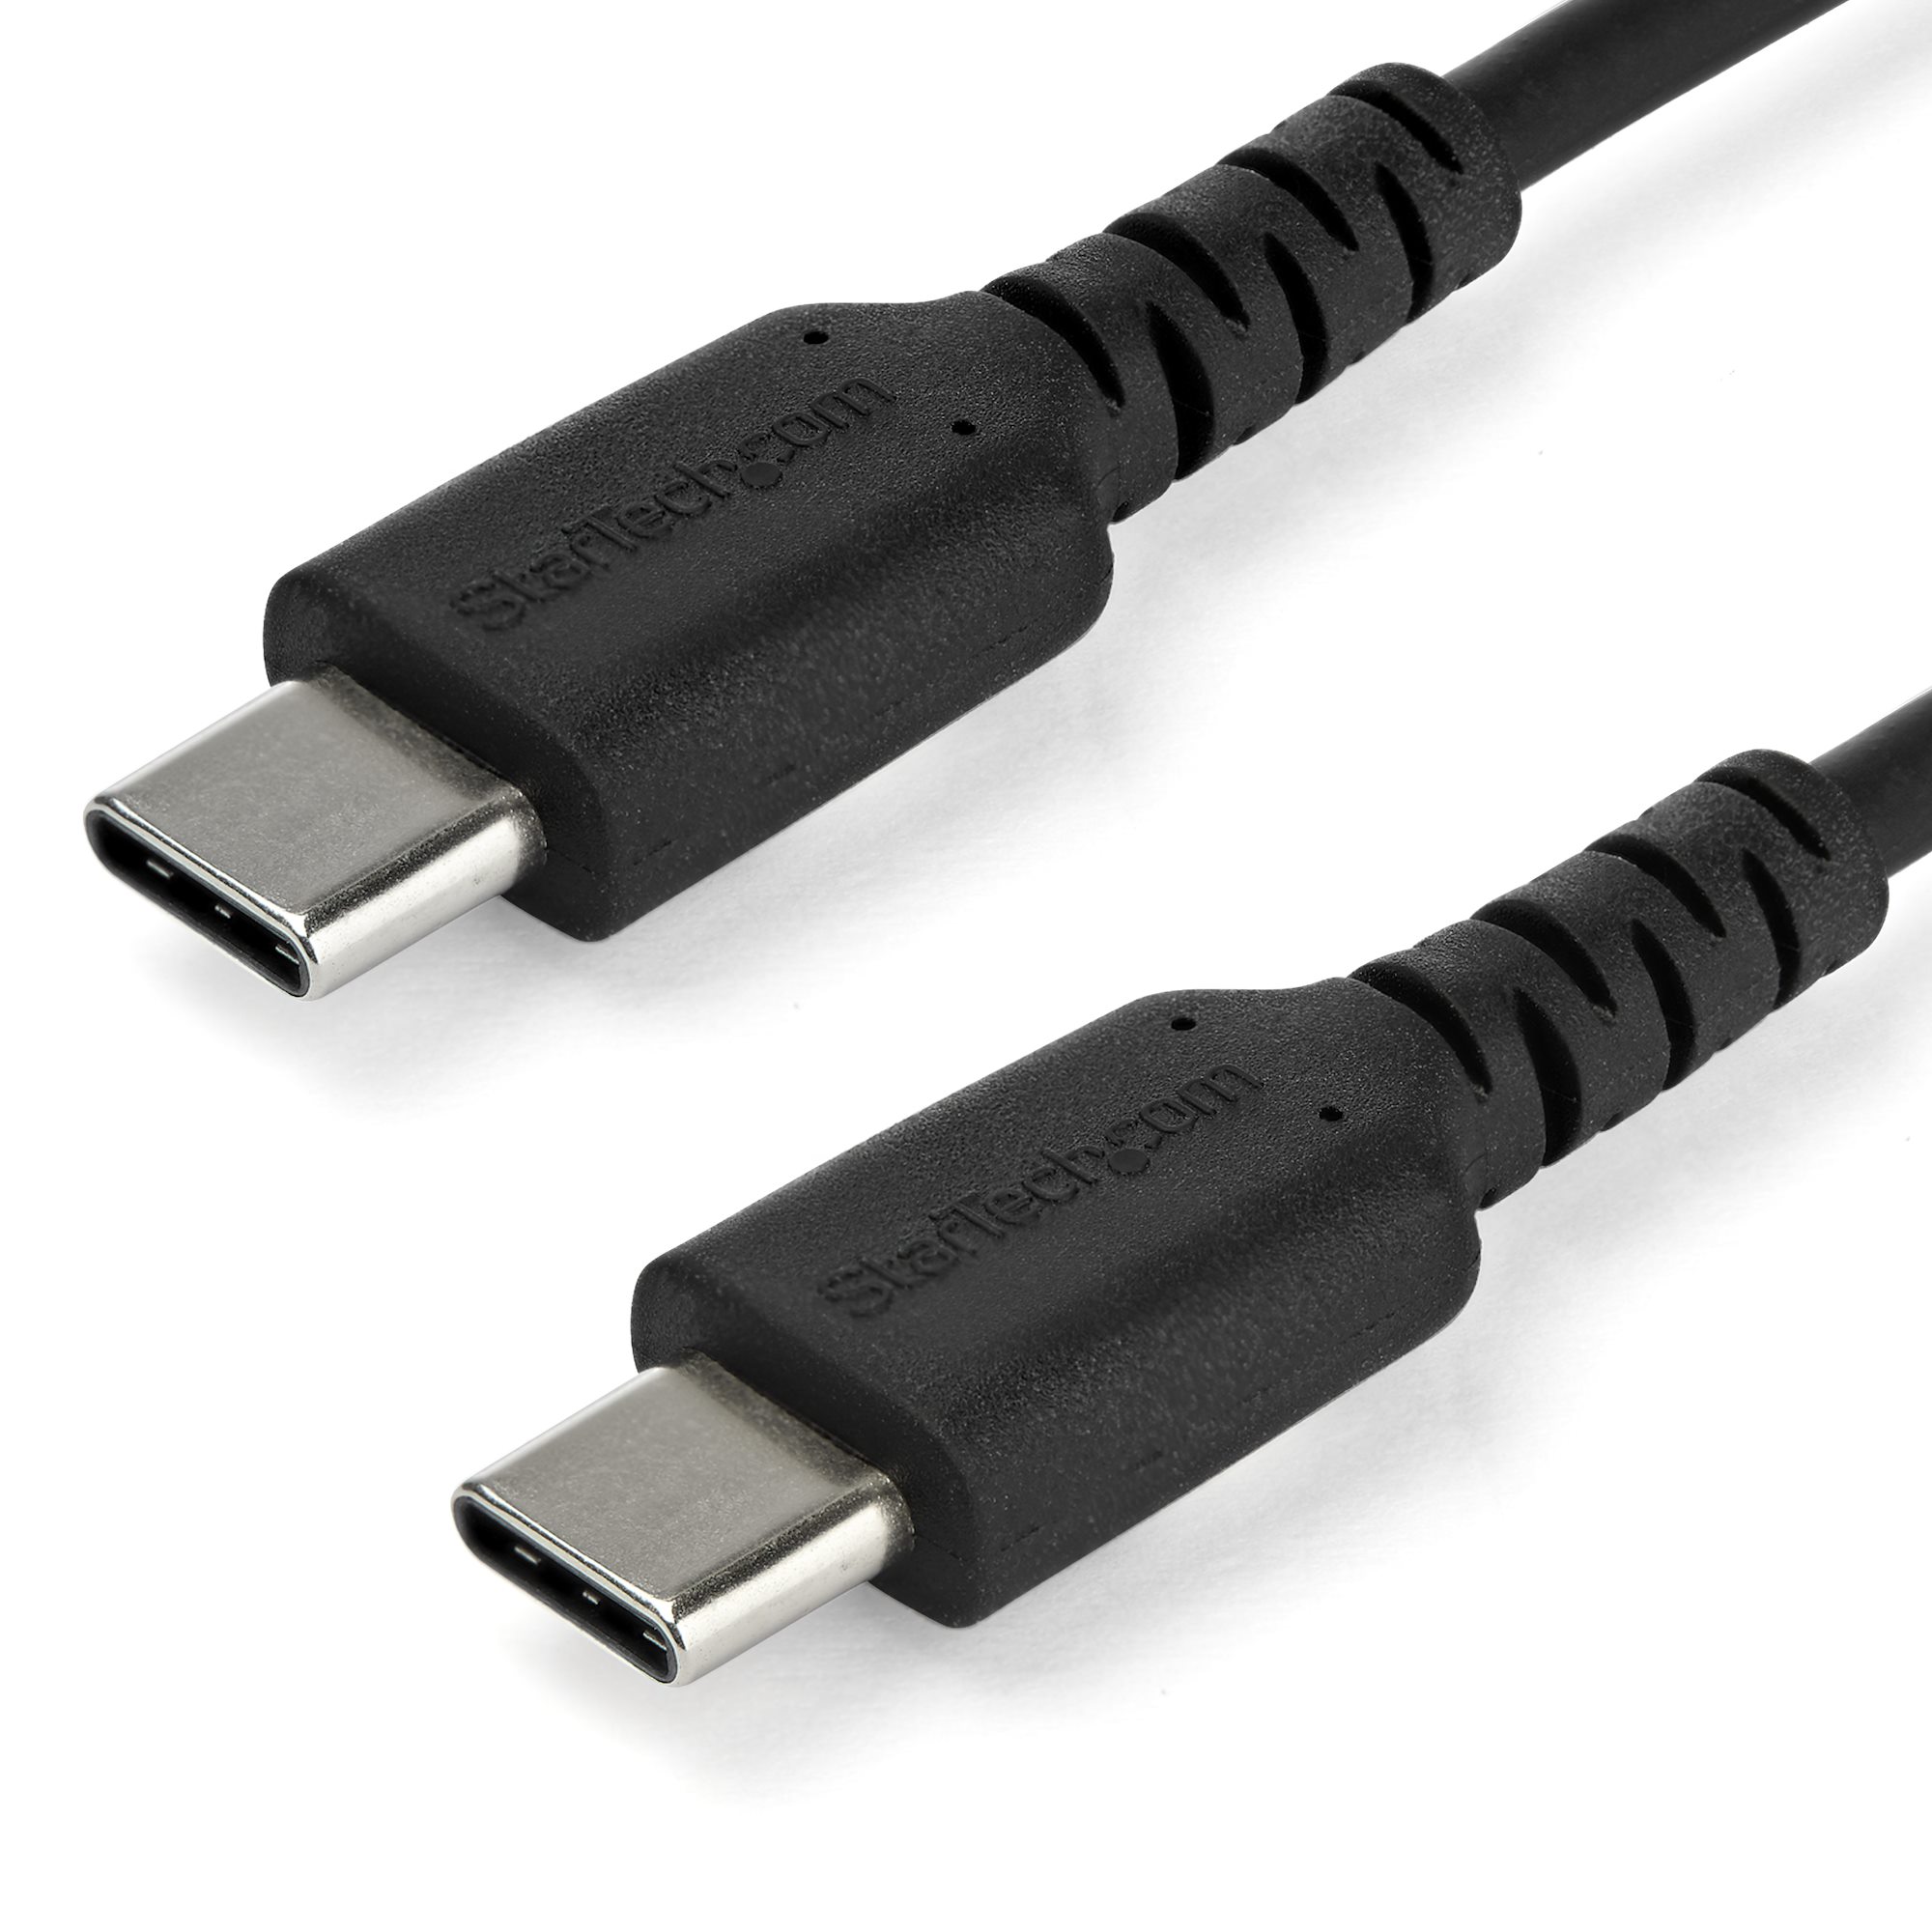 Data cable USB 3.0 - Type-C